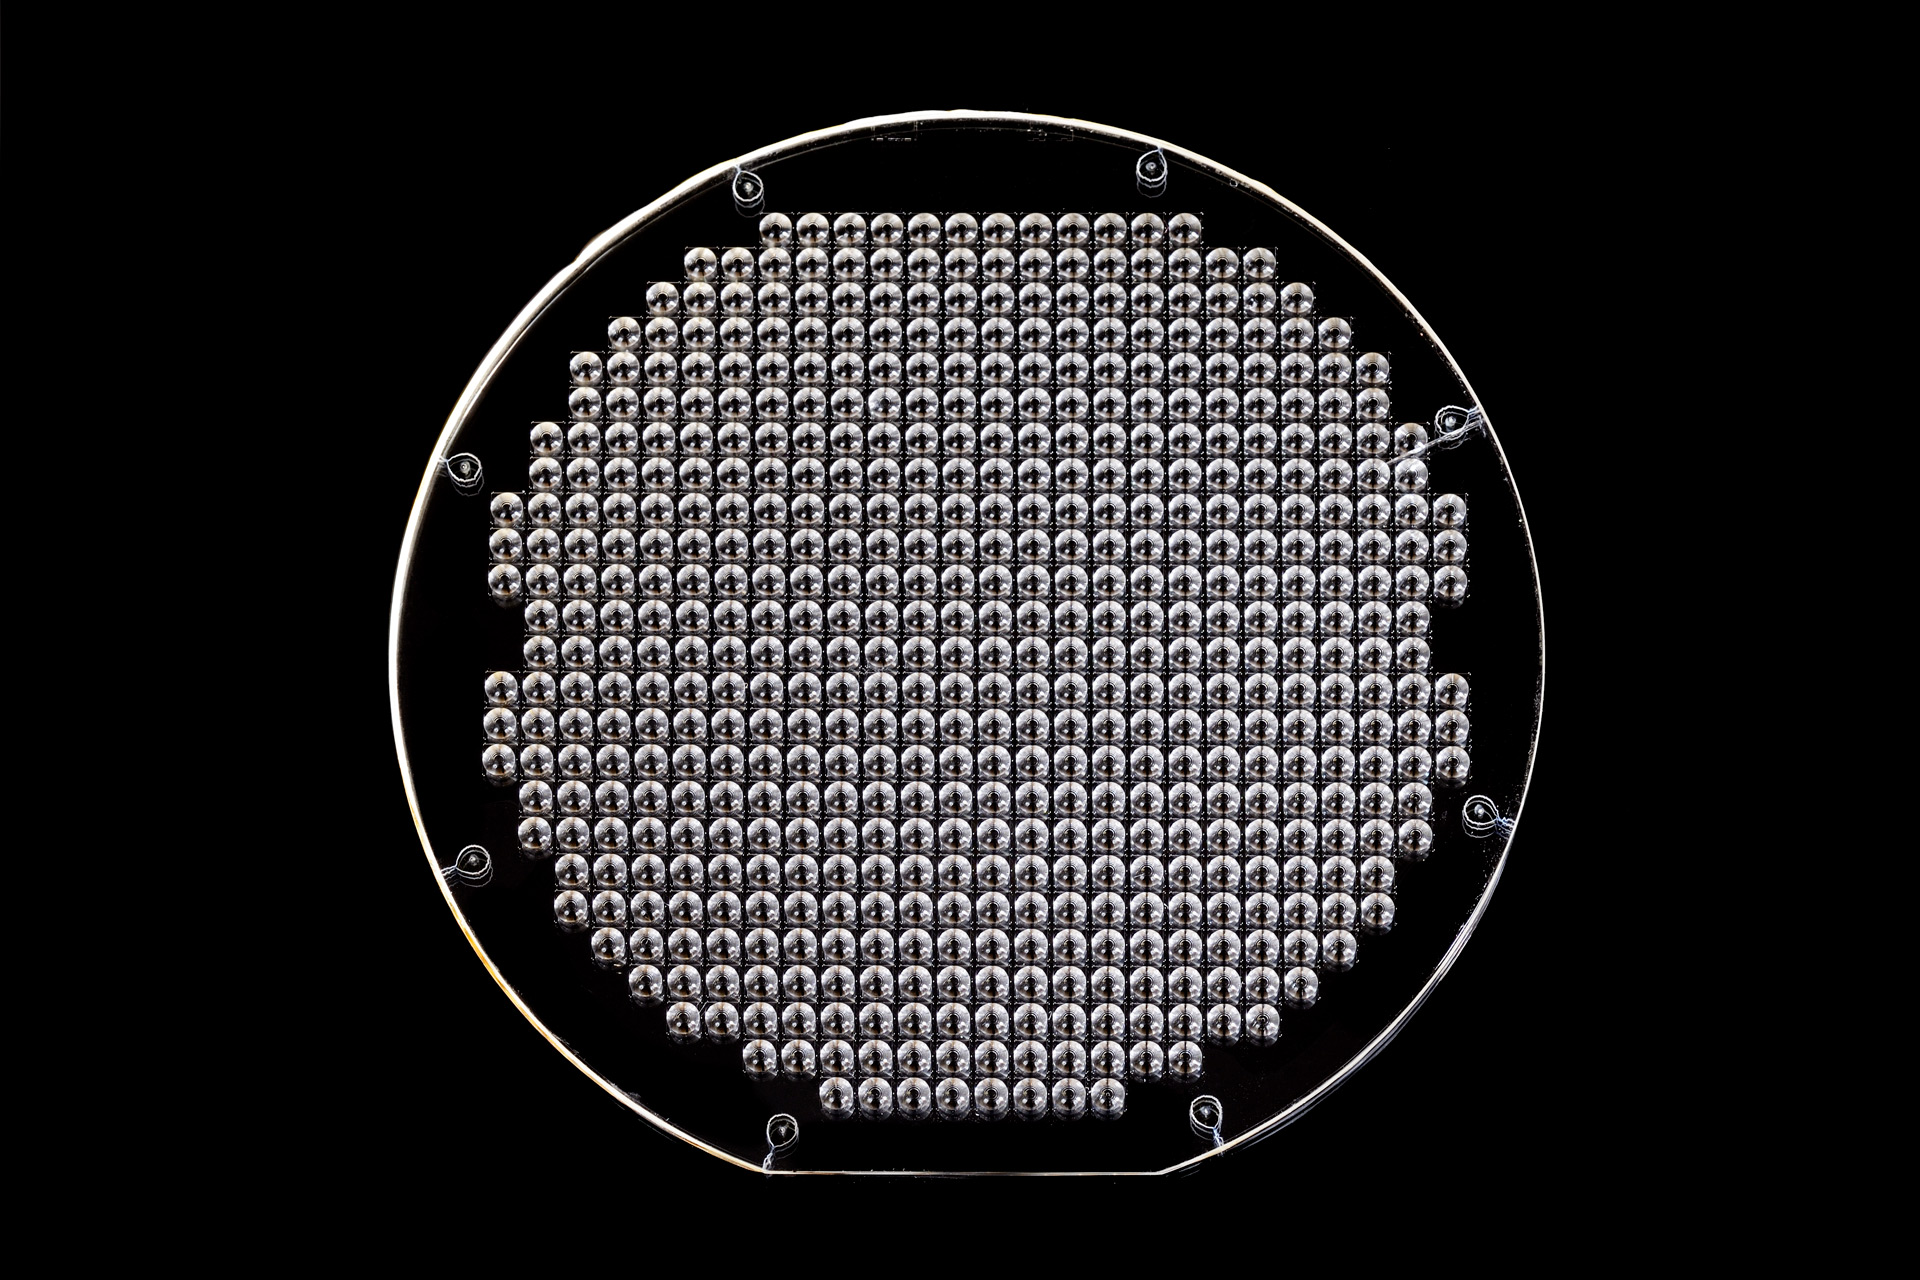 Fused silica wafer with microlenses.